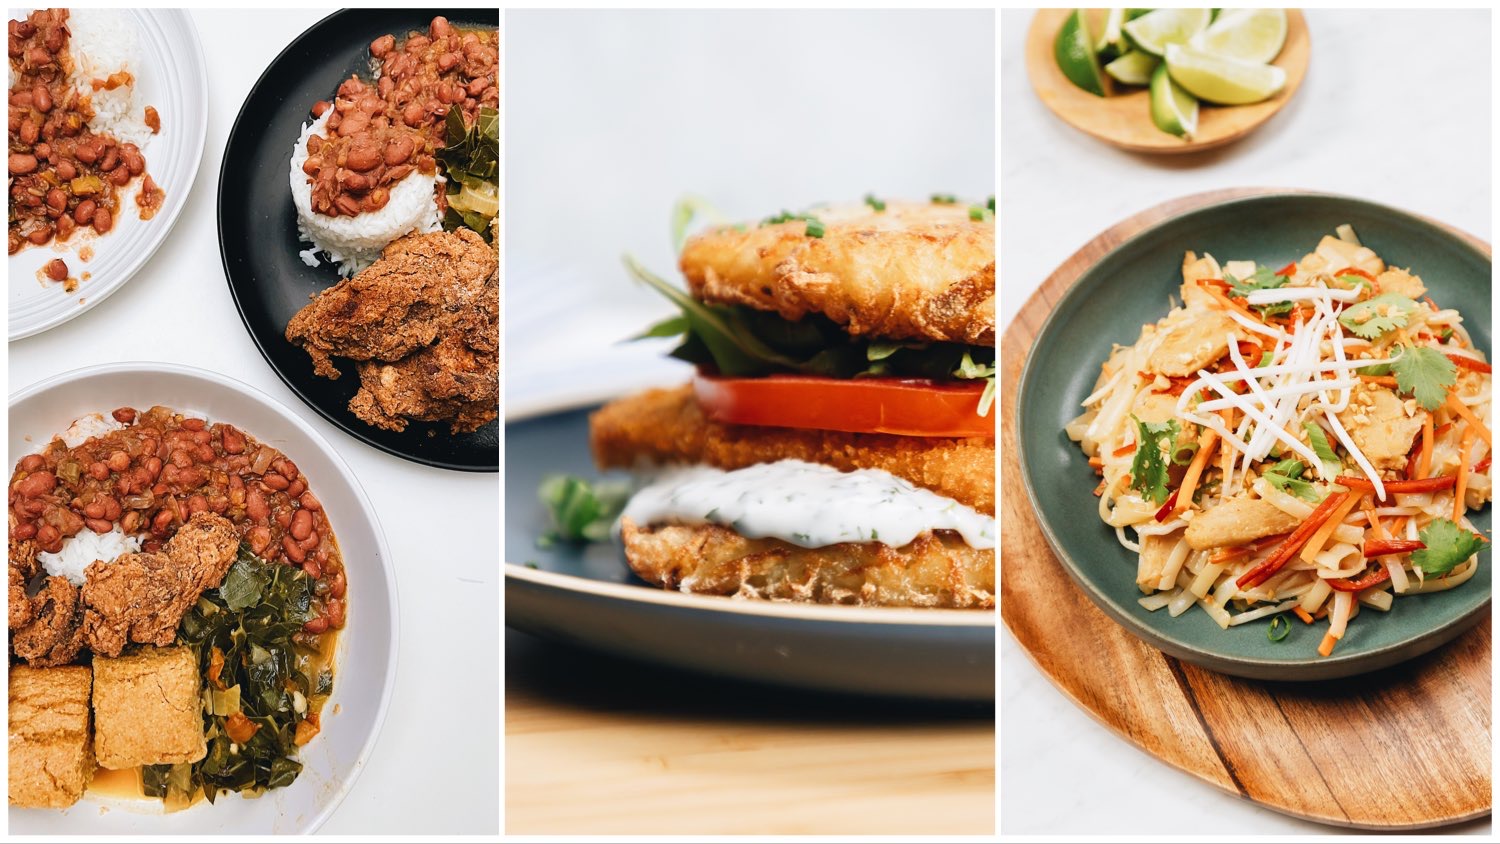 Three way split image featuring photos of a soul food meal (left), a vegan chicken sandwich (center), and orange chicken (right).